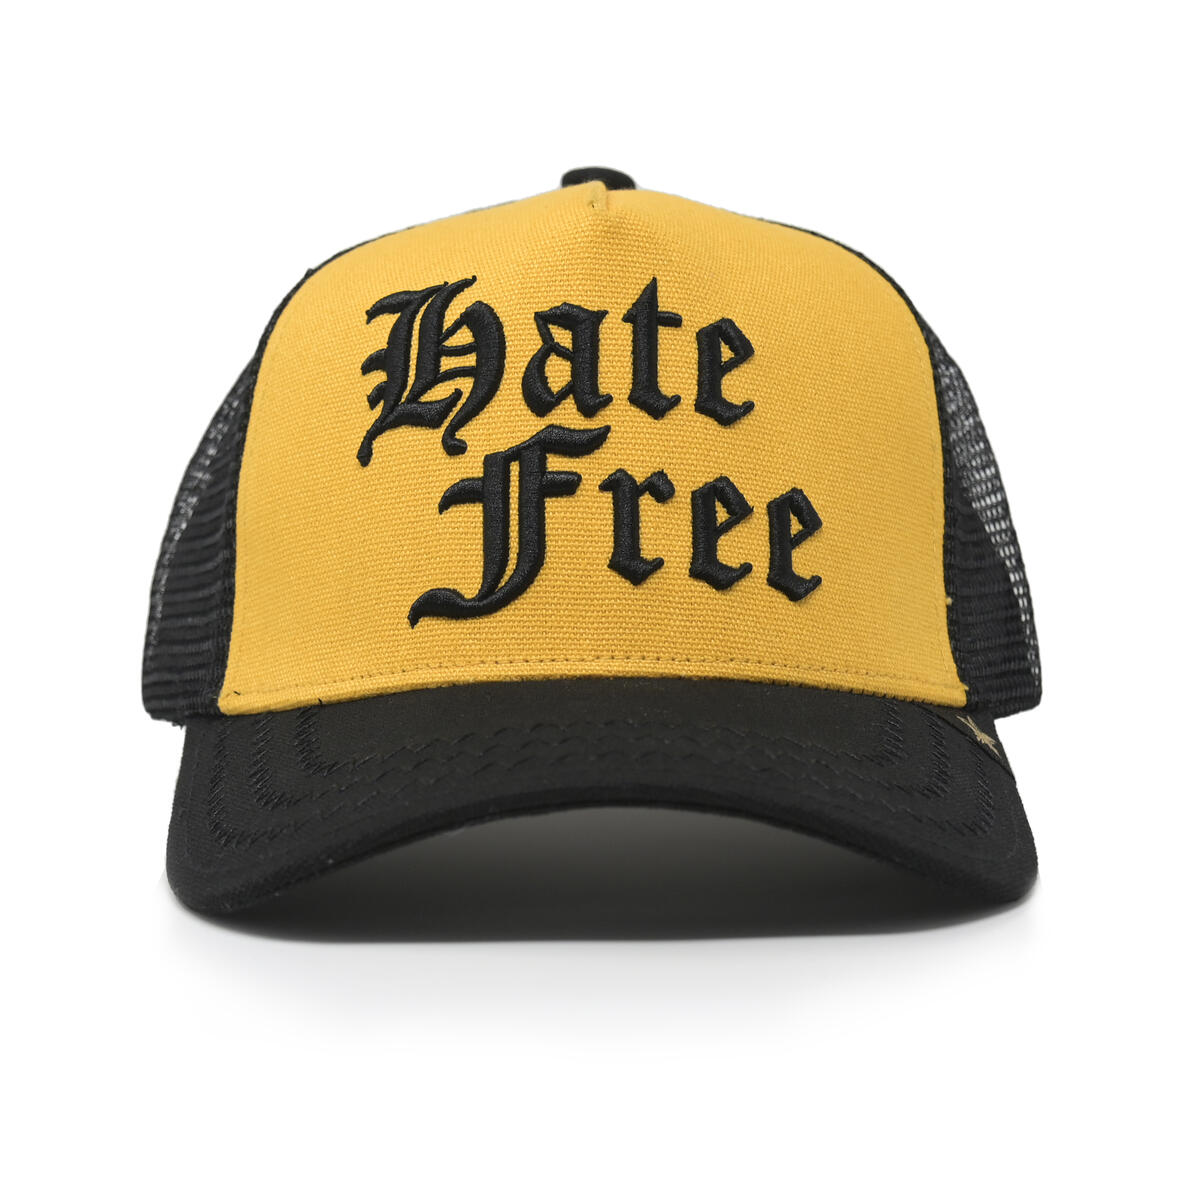 GOLD STAR - Hate Free - Yellow/Black